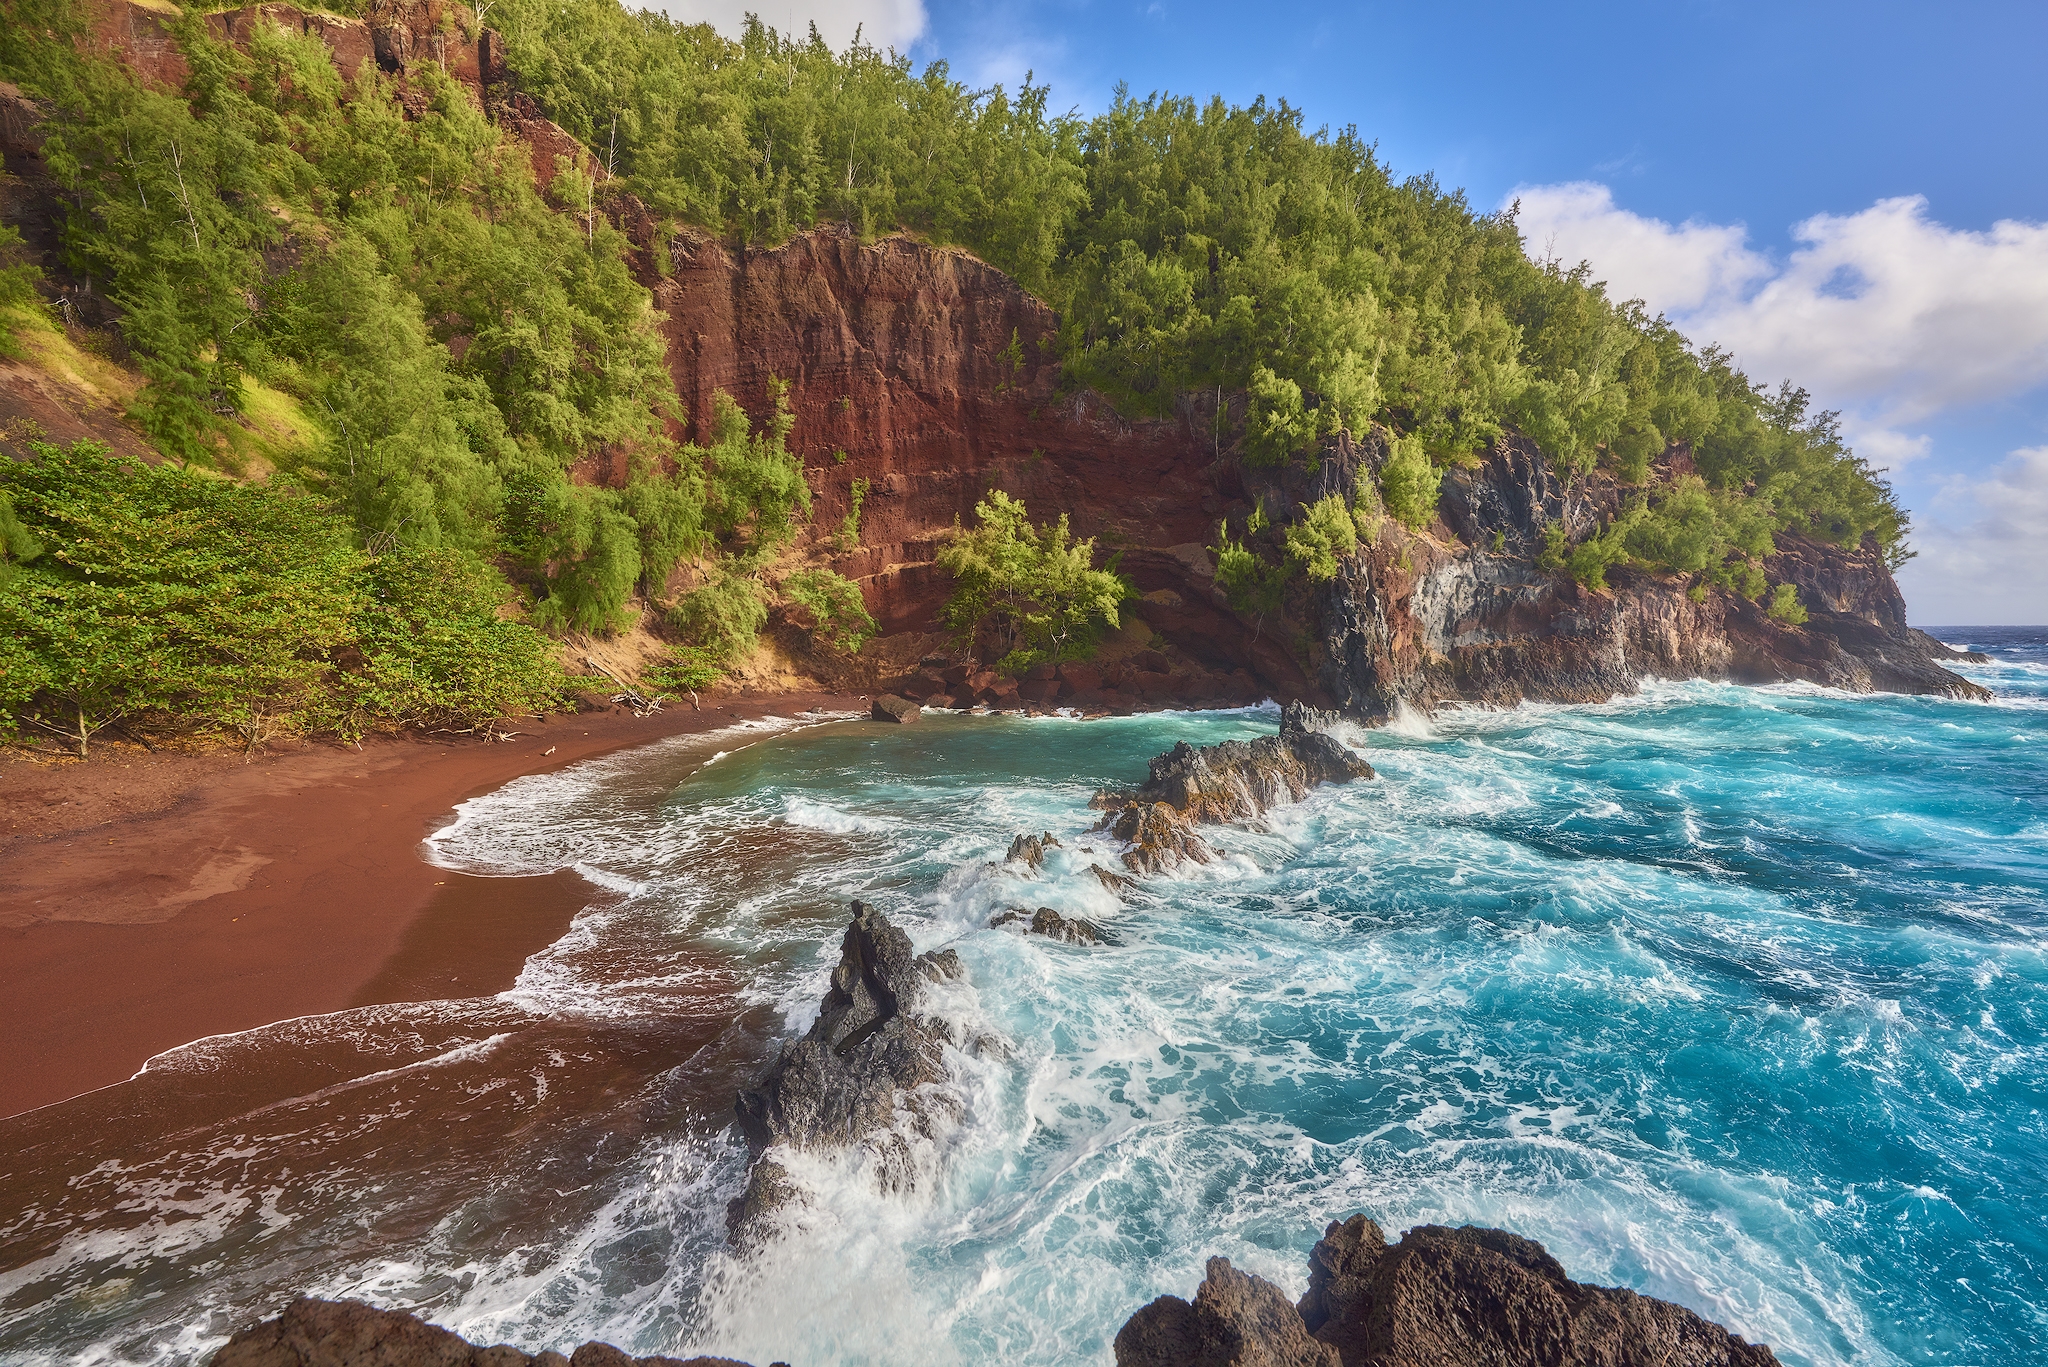 Coastline and Turquoise Sea by Andrew Shoemaker